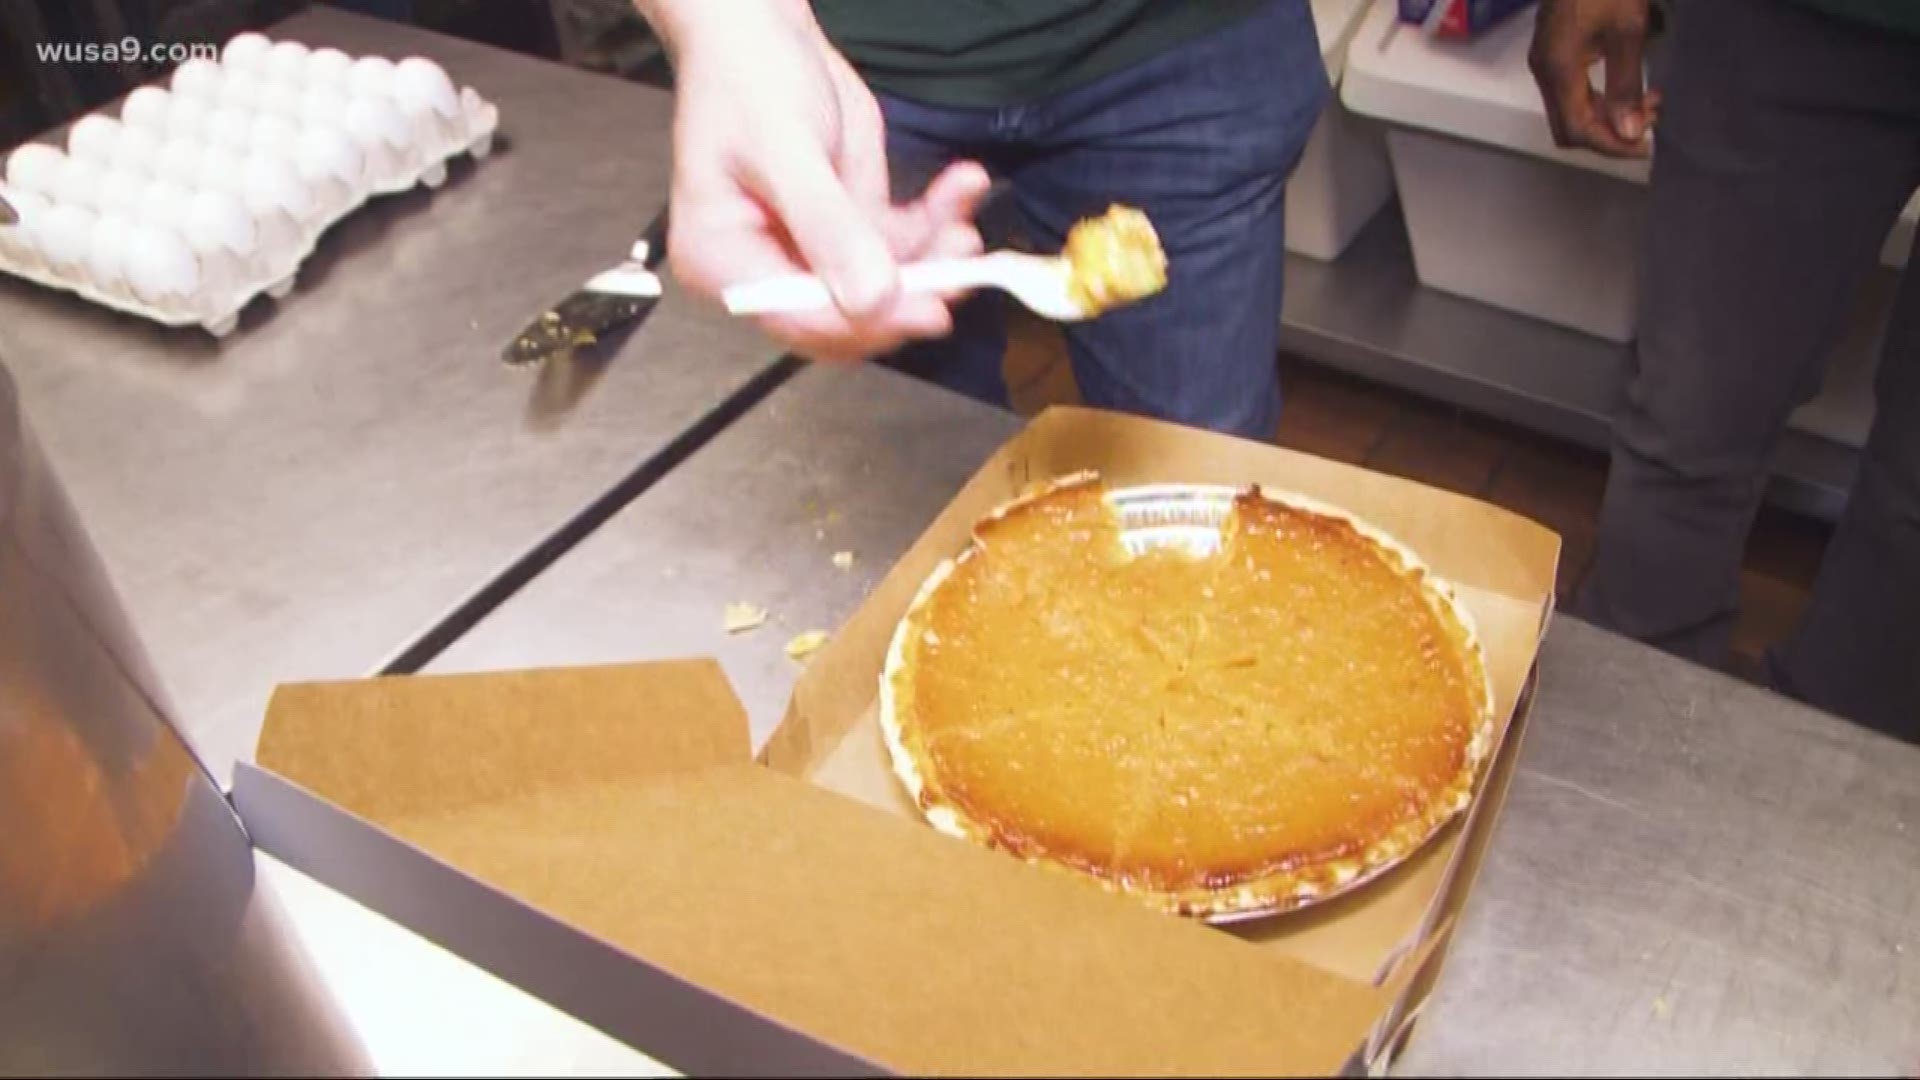 Where can you find the best pie in Washington, D.C.? Mike Wise has the answer